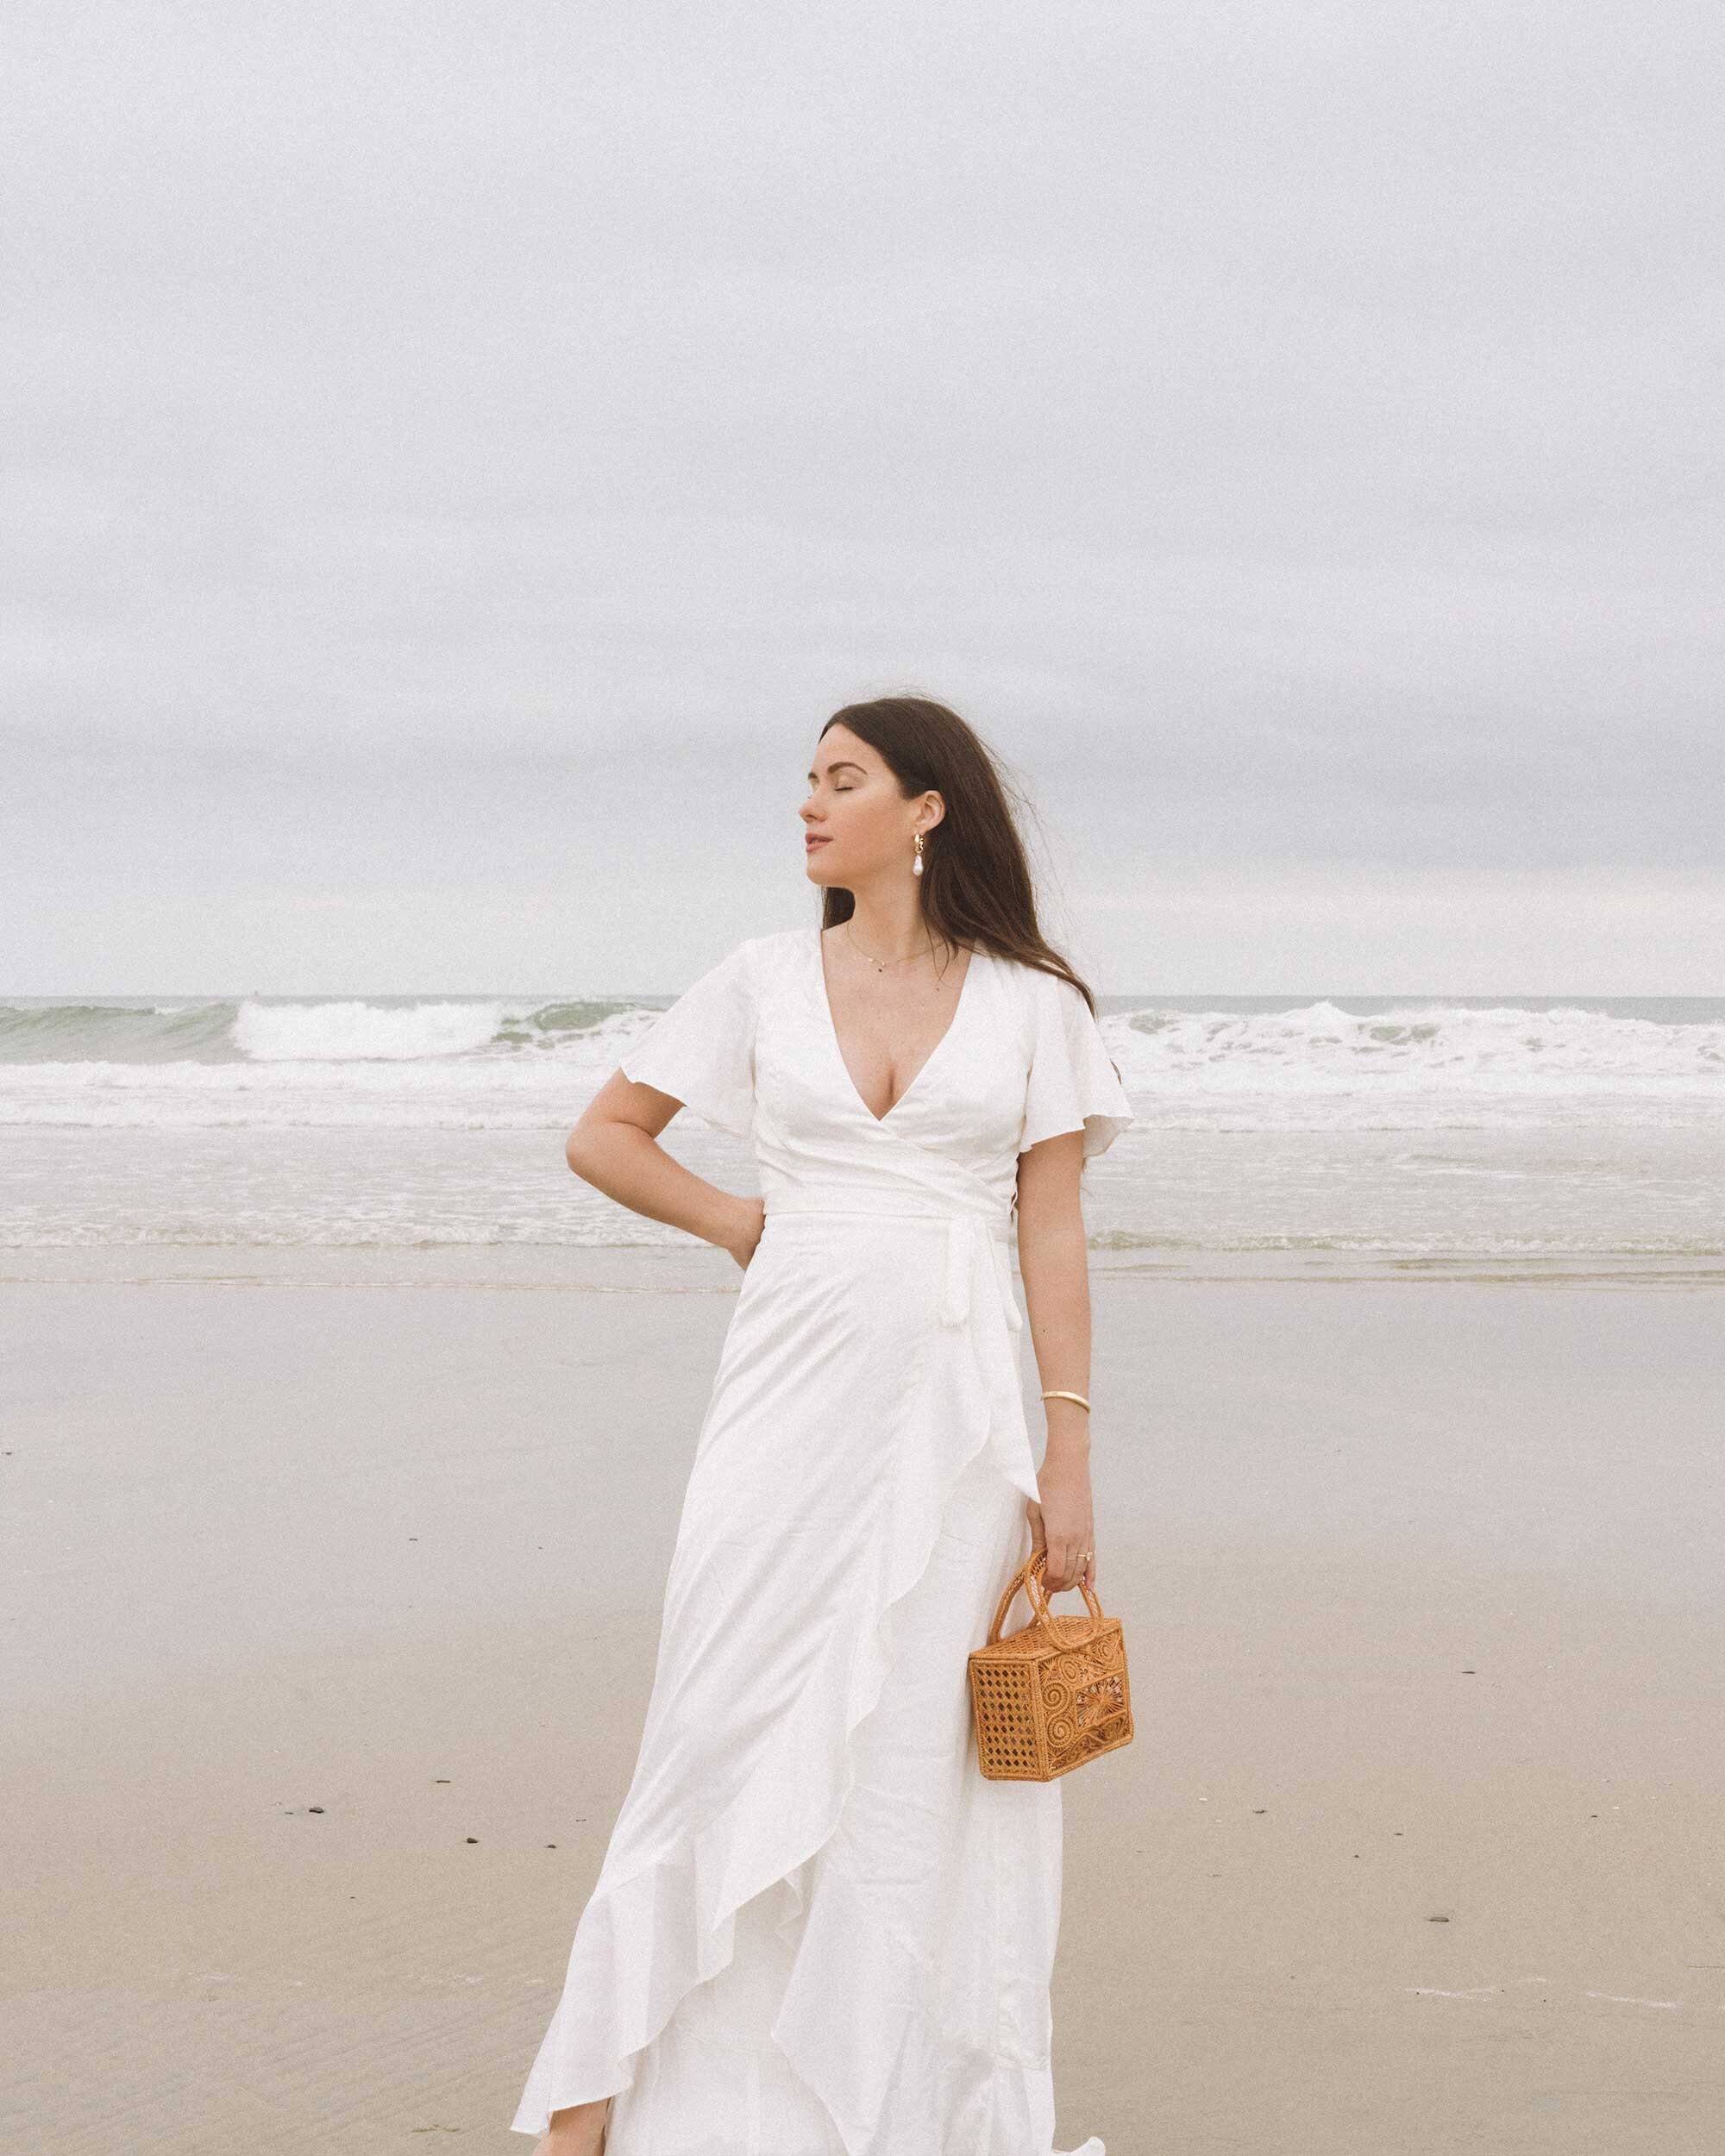 Chic white dresses for spring. Sarah Butler of @sarahchristine wearing  Charmeuse Ruffle Mini Dress with Back Tie and Flutter Sleeve Stretch Satin Dress with Ruffle Hem in Newport Beach, California -8.jpg